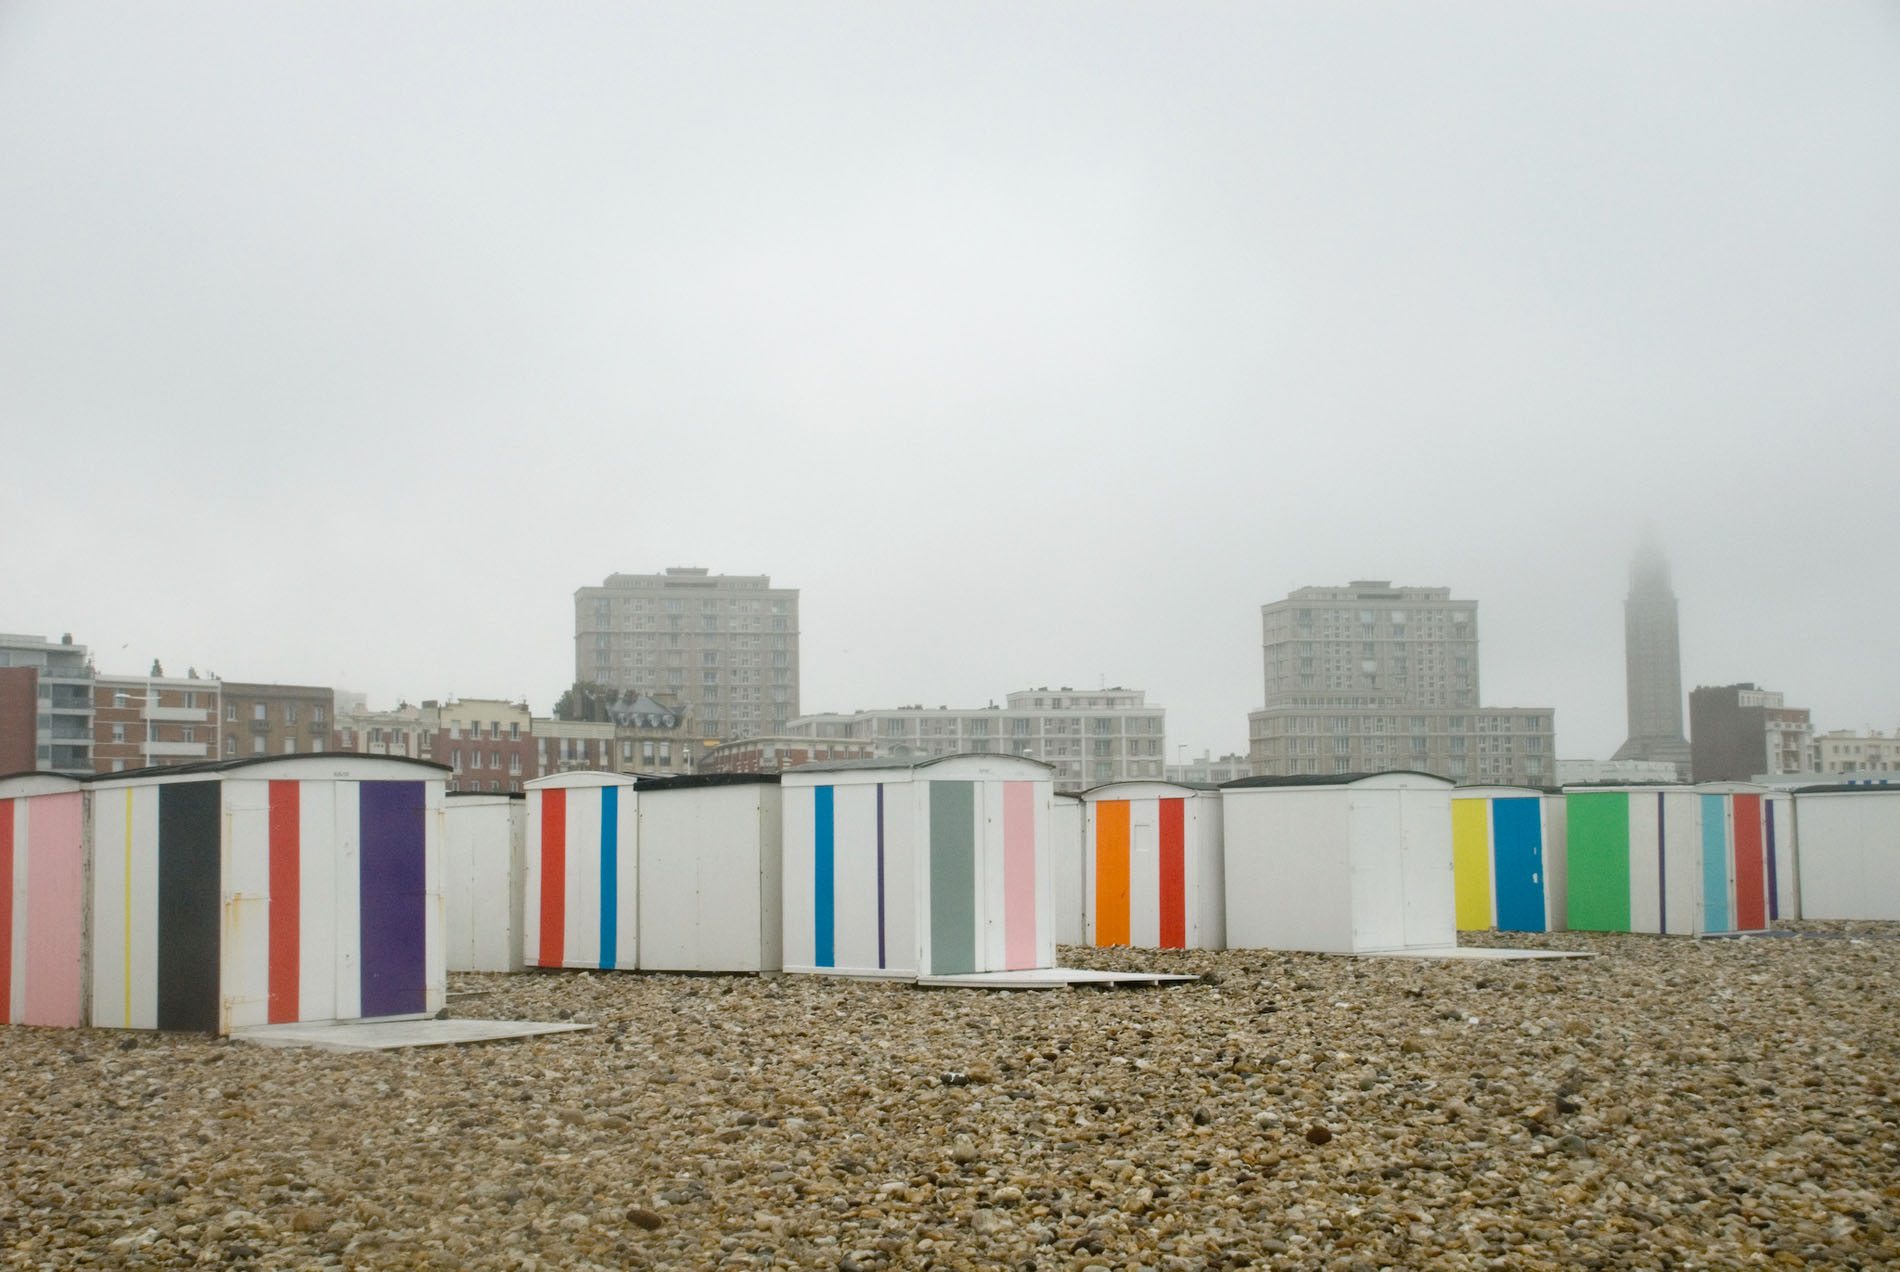 ... und Karel Martens "Colors on the Beach".